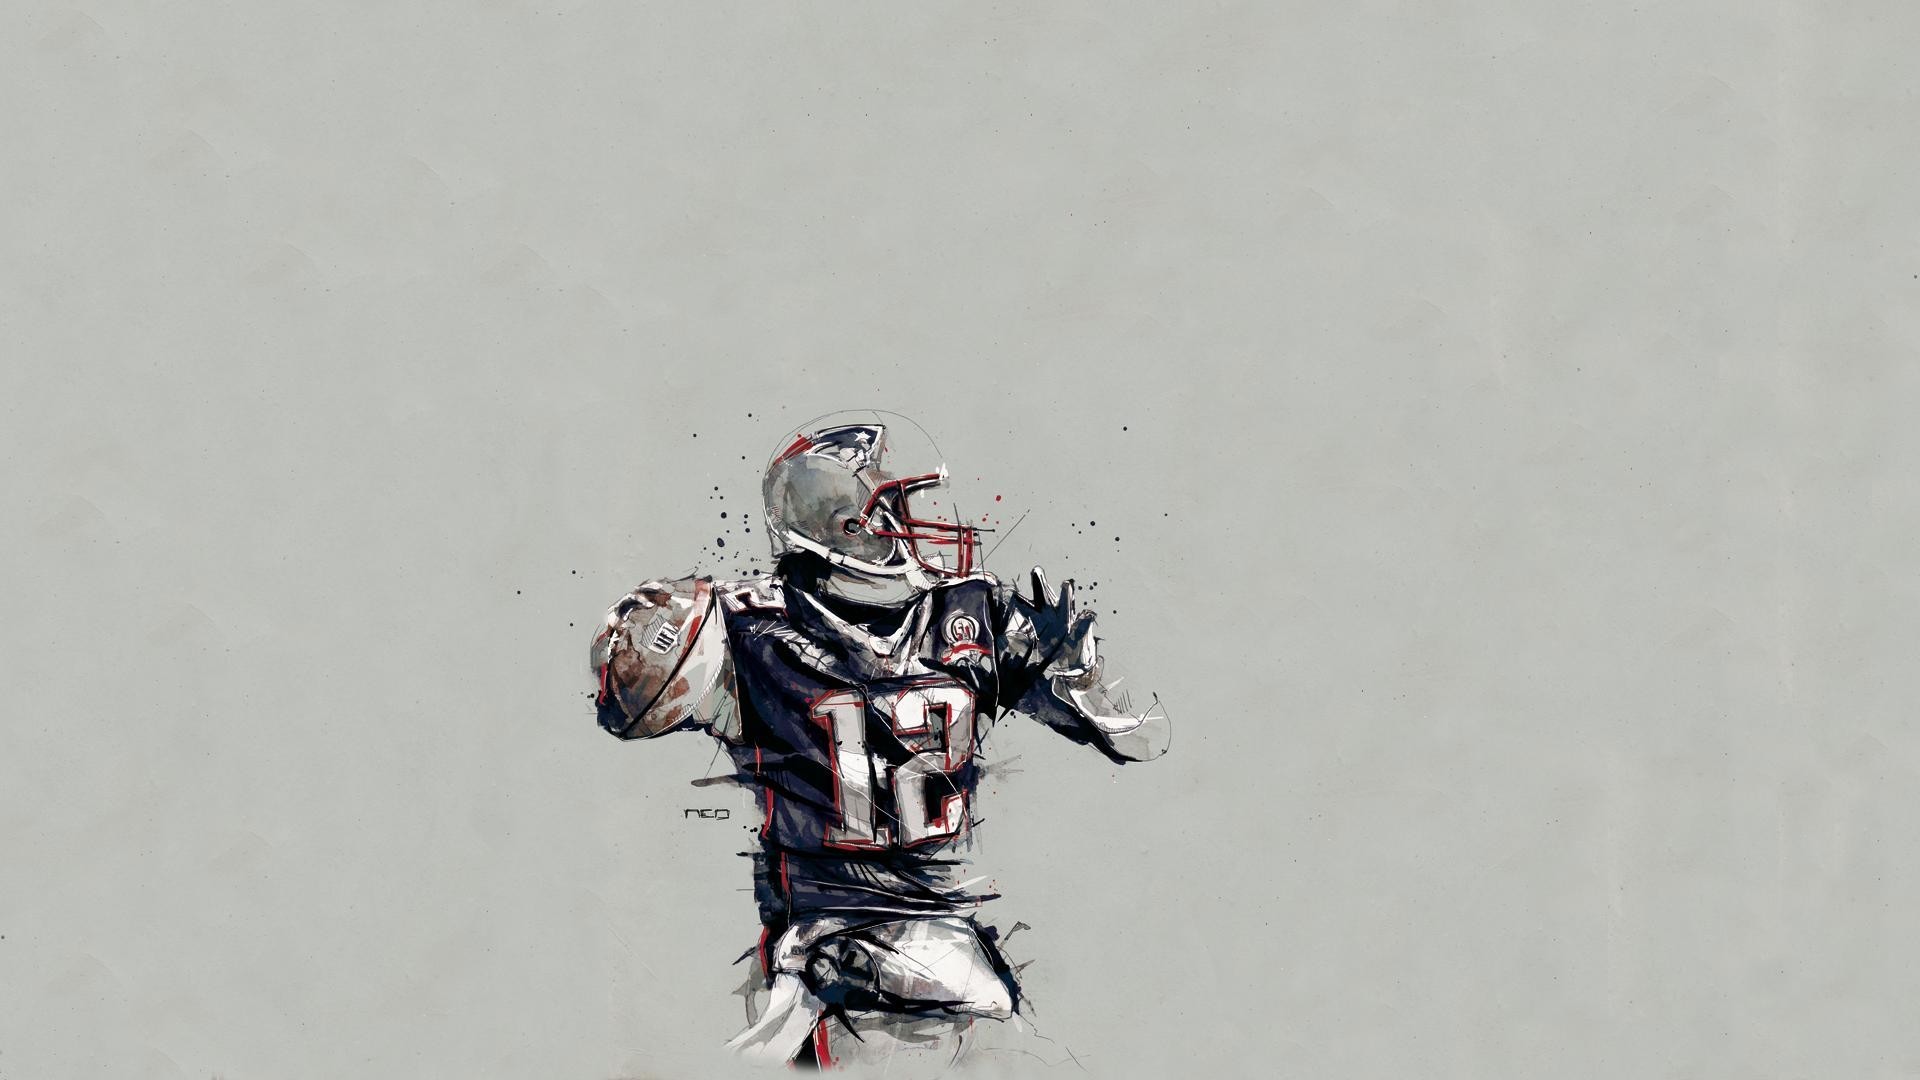 New England Patriots NFL Wallpaper With high-resolution 1920X1080 pixel. Download and set as wallpaper for Desktop Computer, Apple iPhone X, XS Max, XR, 8, 7, 6, SE, iPad, Android